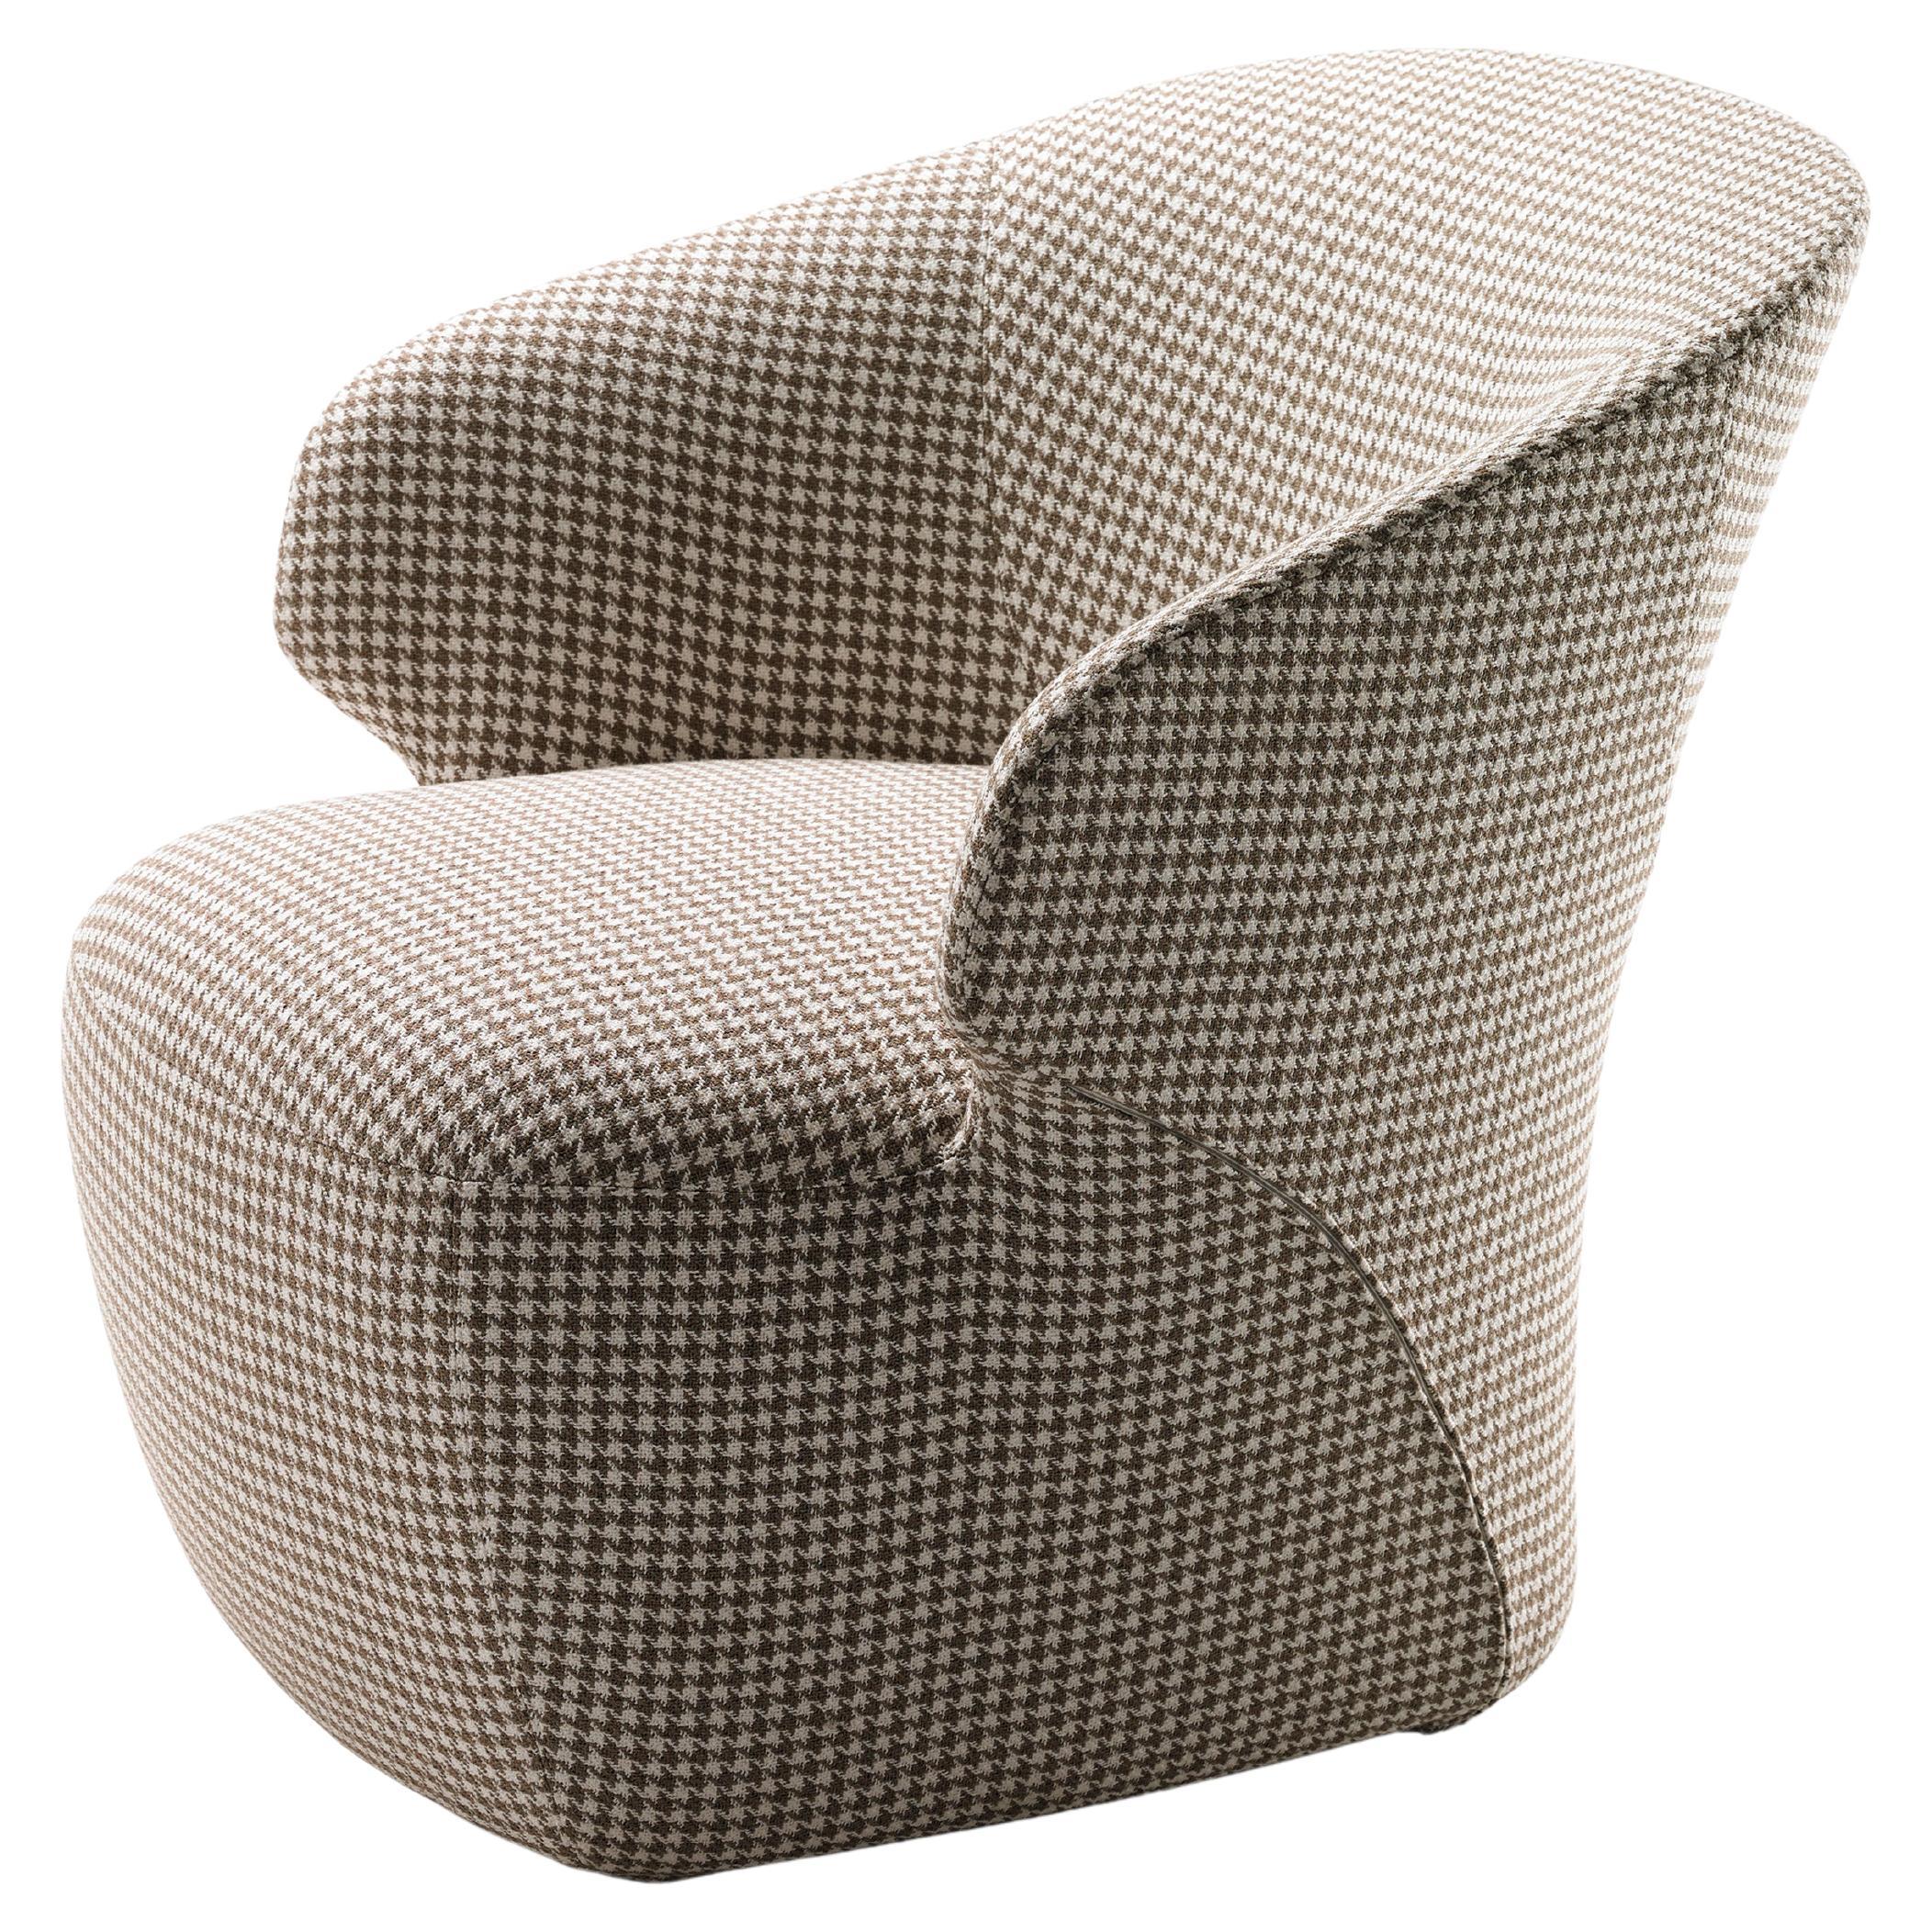 Zanotta Arom Armchair in Pied De Poule White and Brown Fabric For Sale